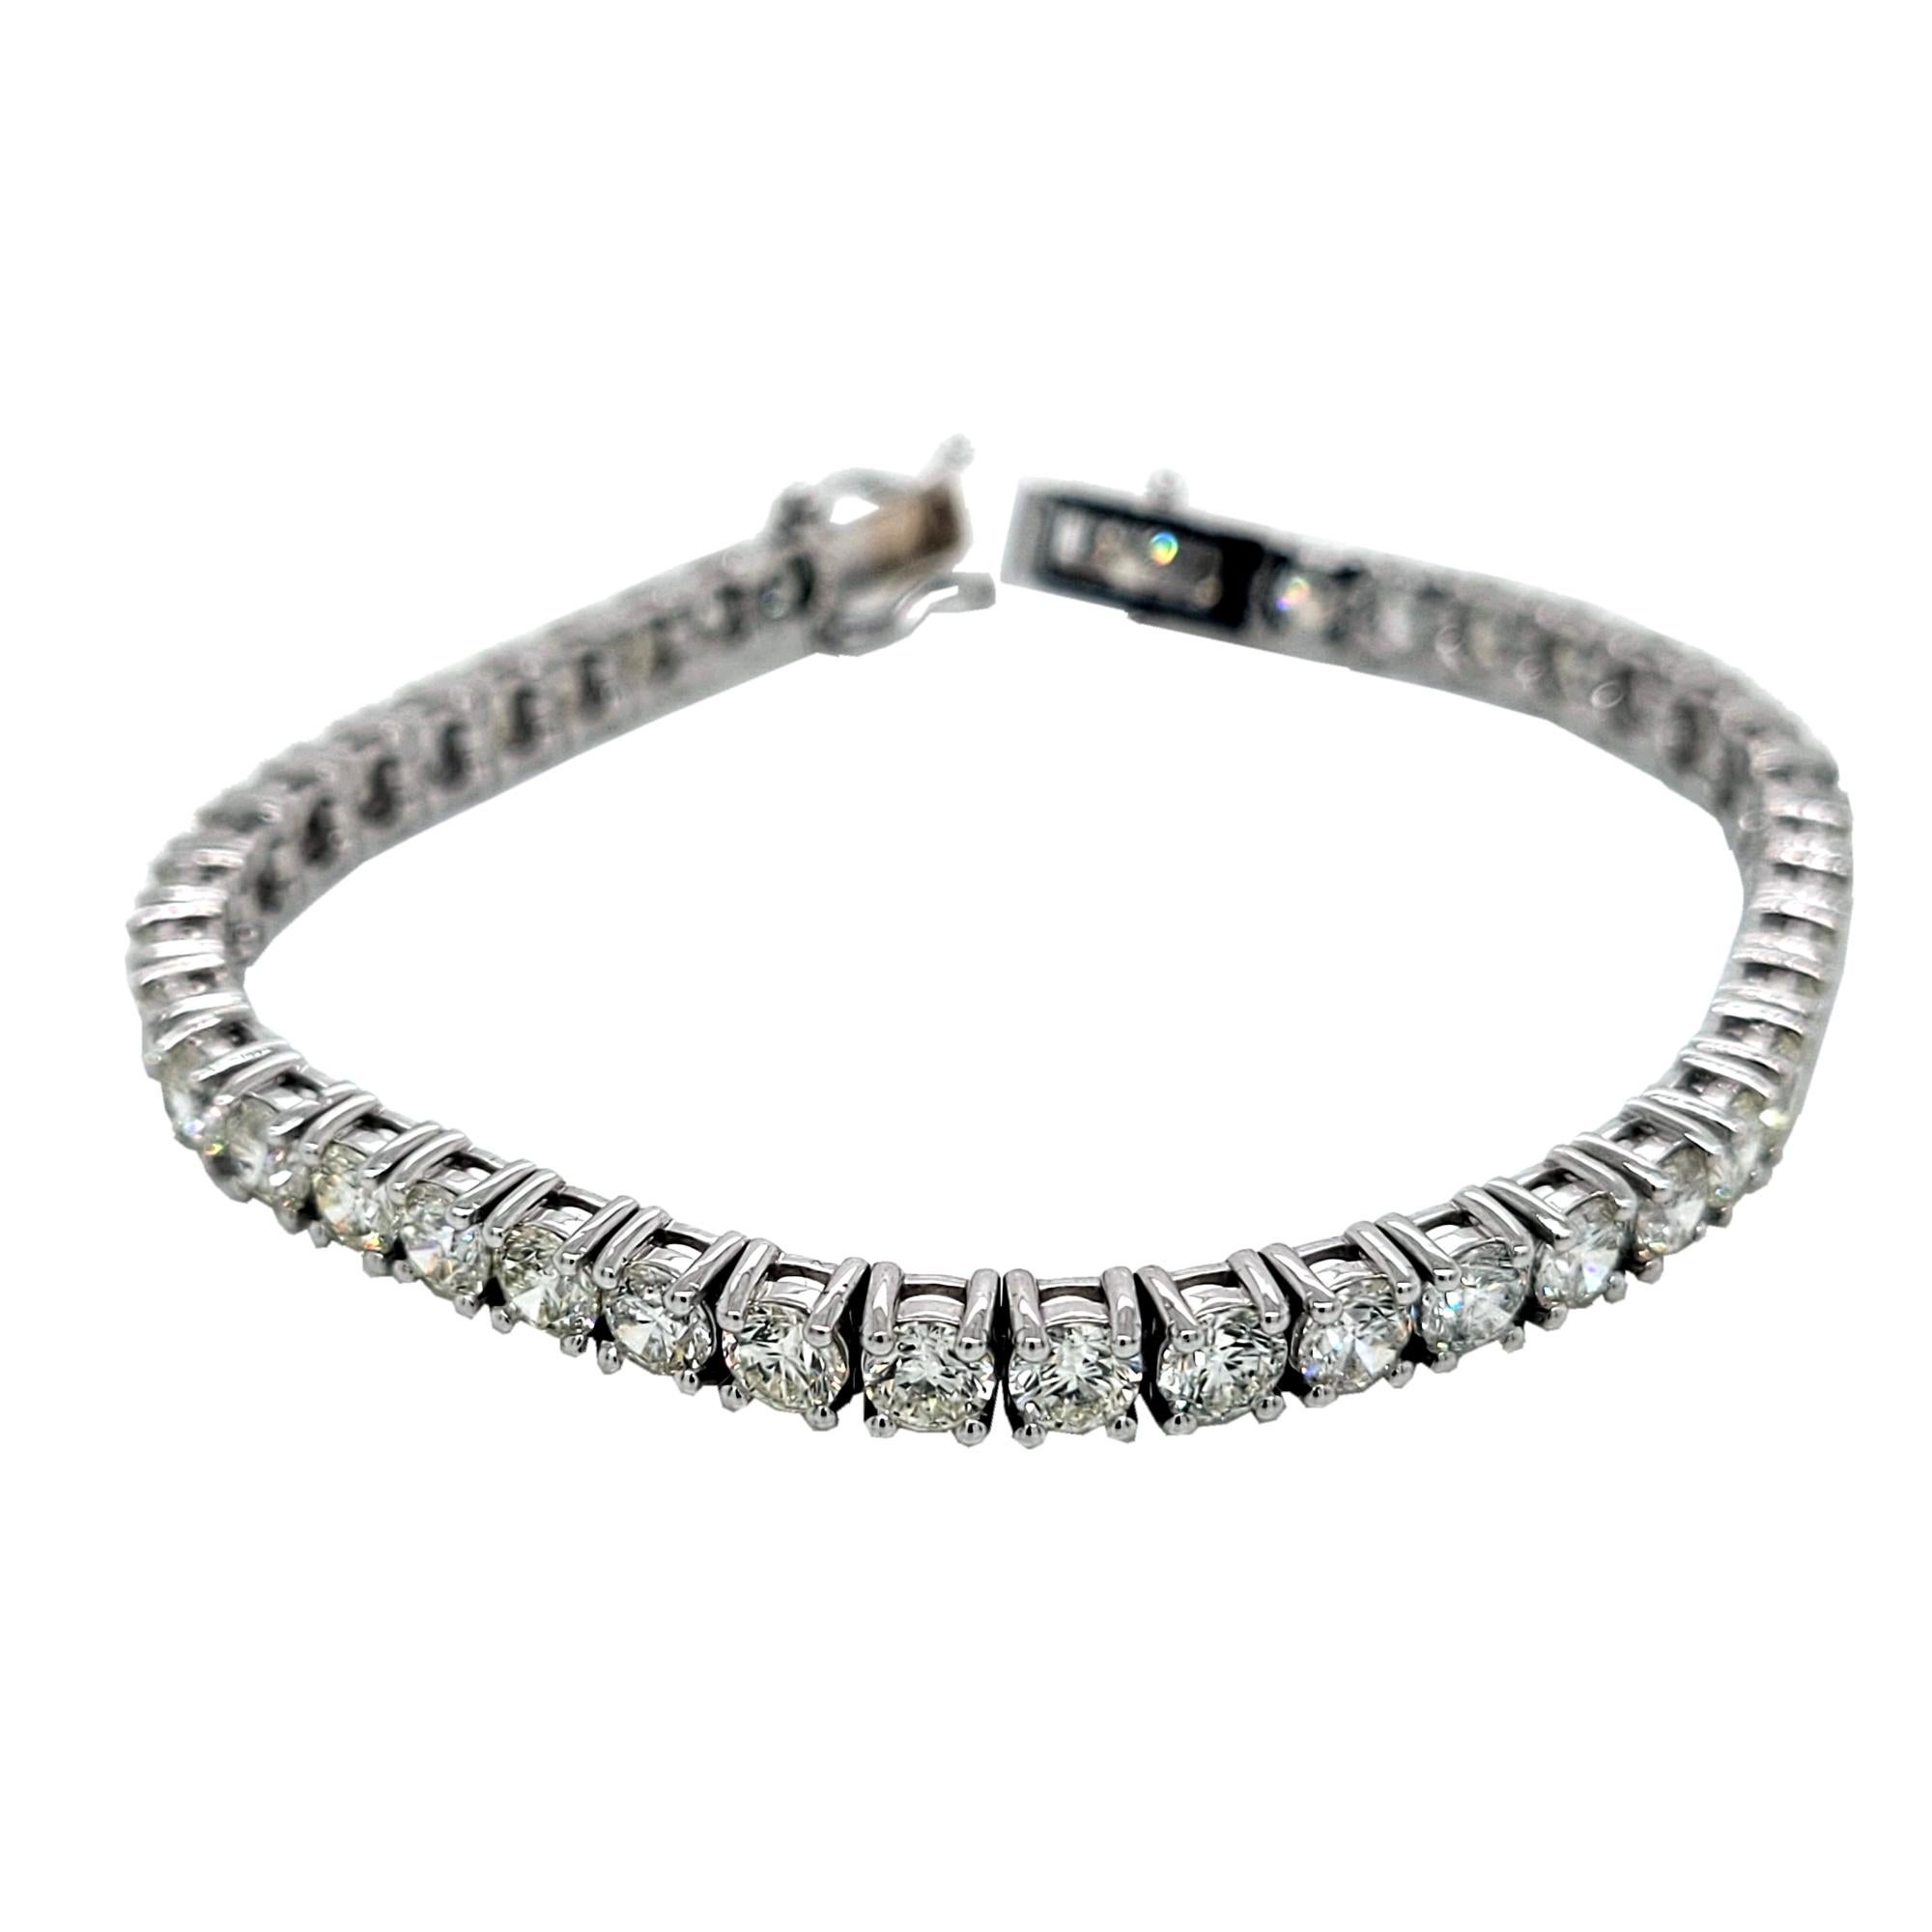 This Diamond Tennis Bracelet consists of 42 Links of 4-Prong Set 4.00 mm (1/4 Ct) Perfectly matched Round Brilliant diamonds set in 14K White Gold.   The bracelet comes with a  Built-In Safety Lock and double safety catch to protect it from loss.